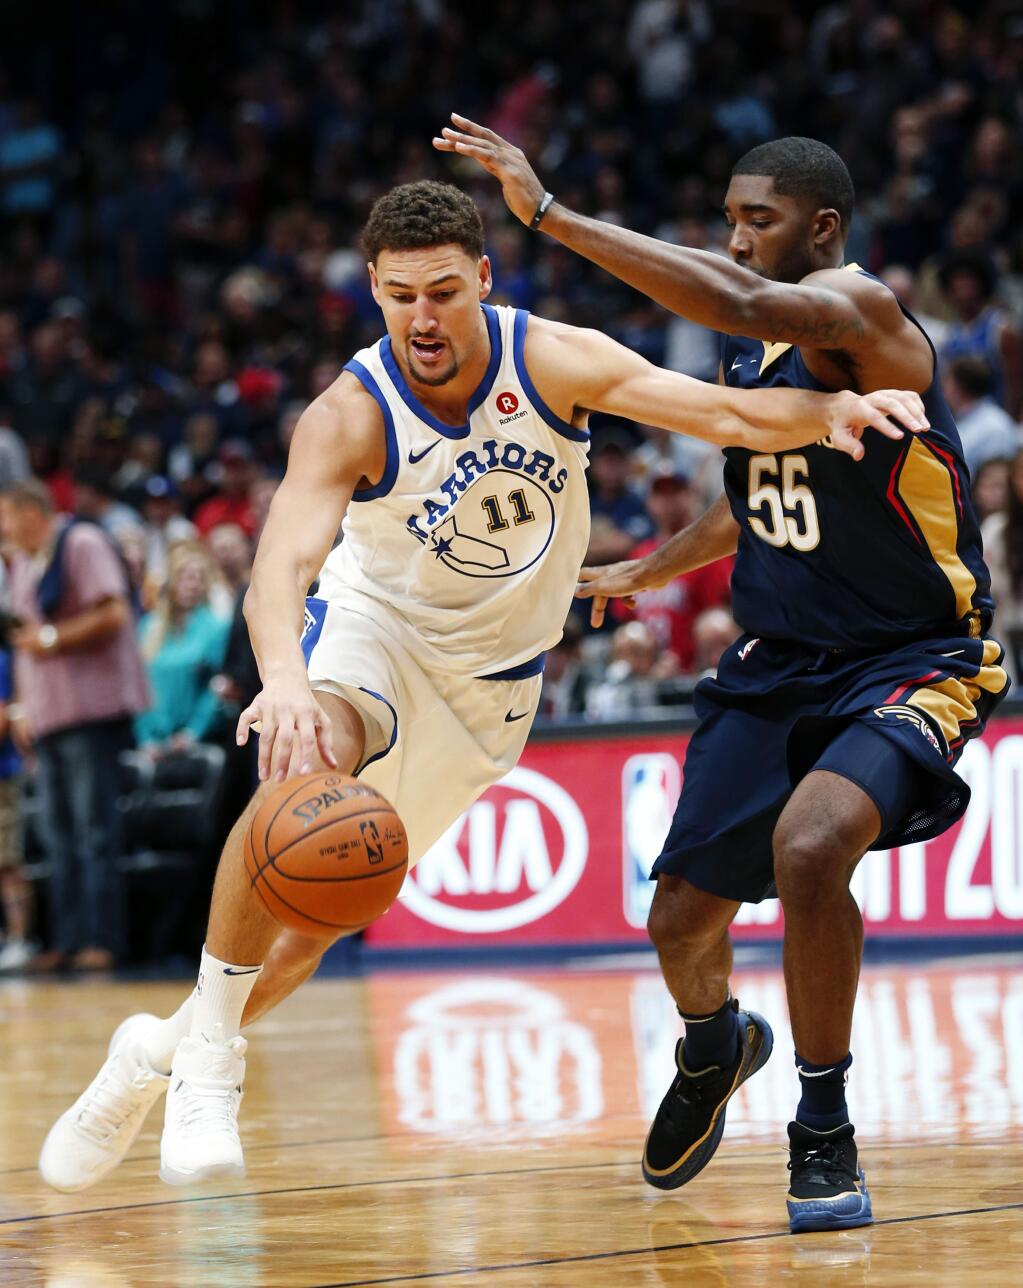 Golden State Warriors guard Klay Thompson, left, drives against New Orleans Pelicans guard E'Twaun Moore in the first half in New Orleans, Friday, Oct. 20, 2017. (AP Photo/Gerald Herbert)